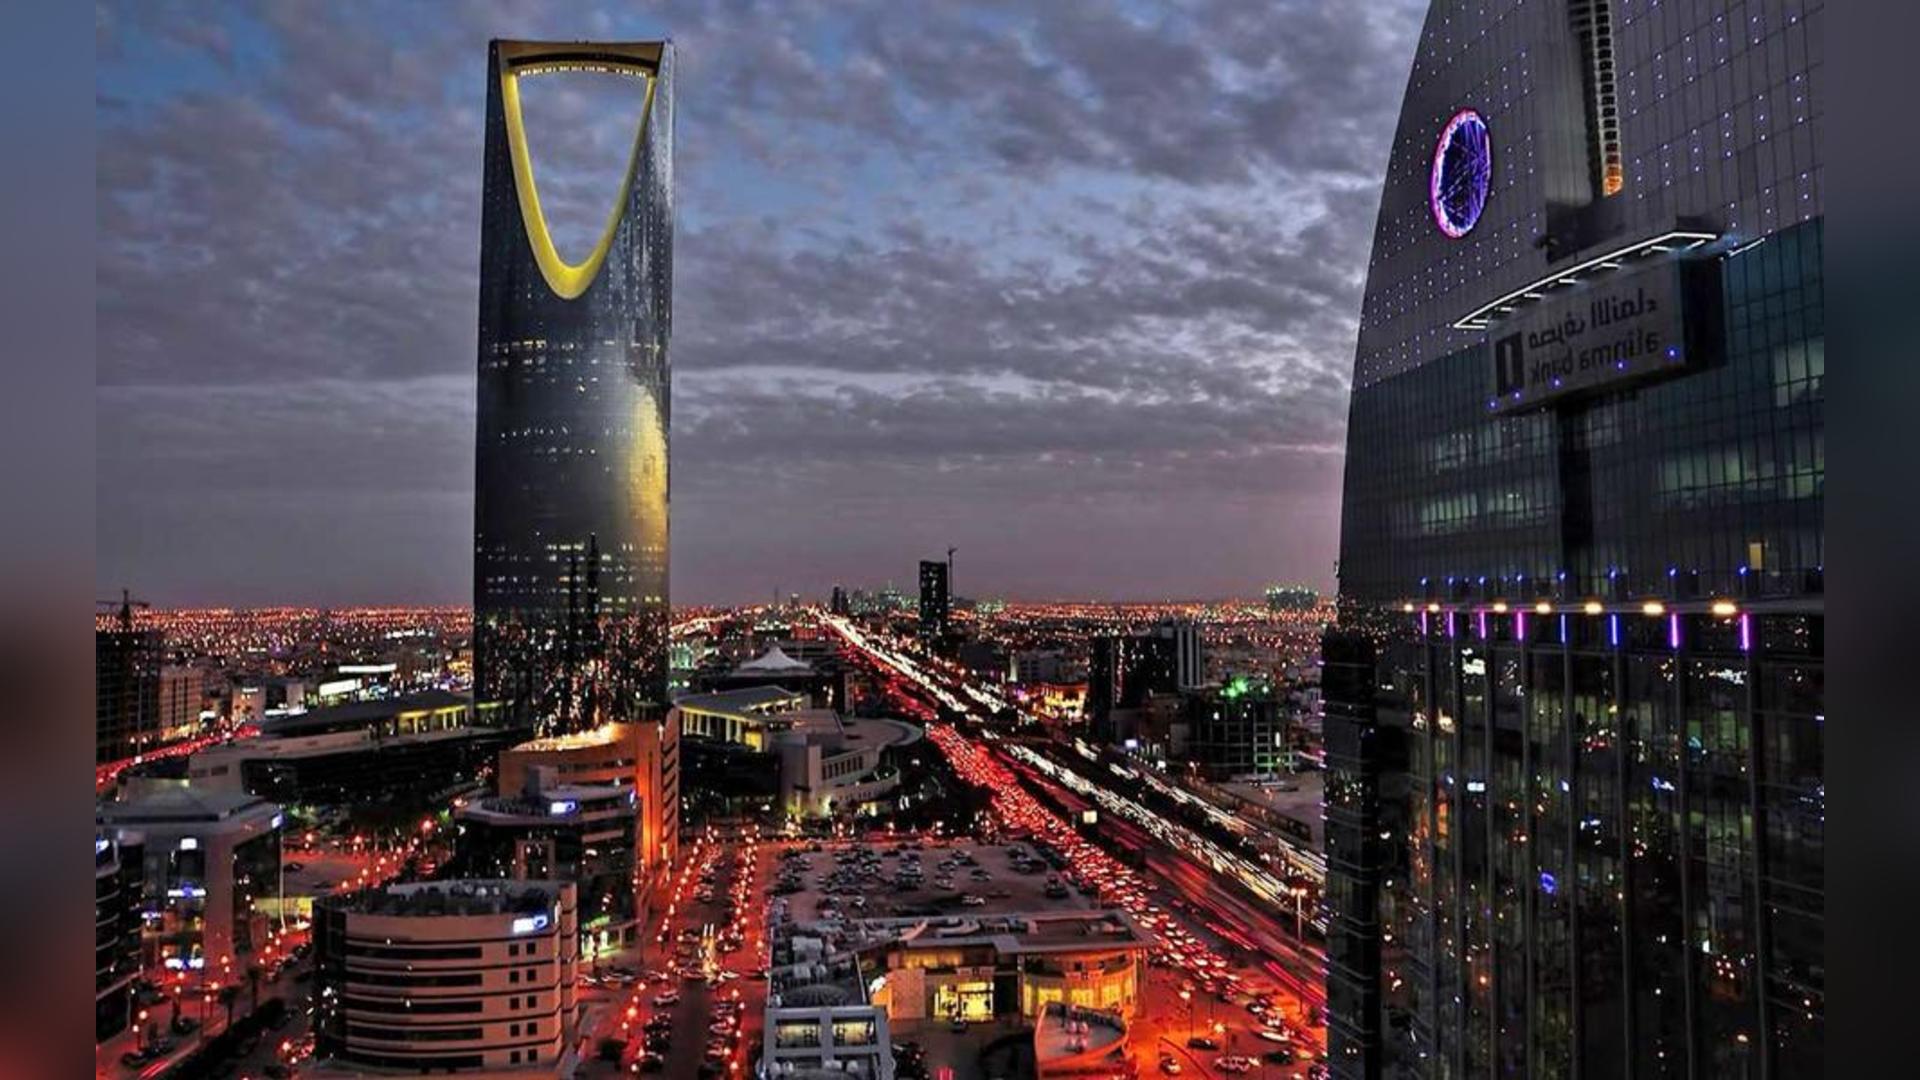 Saudi Arabia has almost double the number of hotel rooms being built than the UAE.